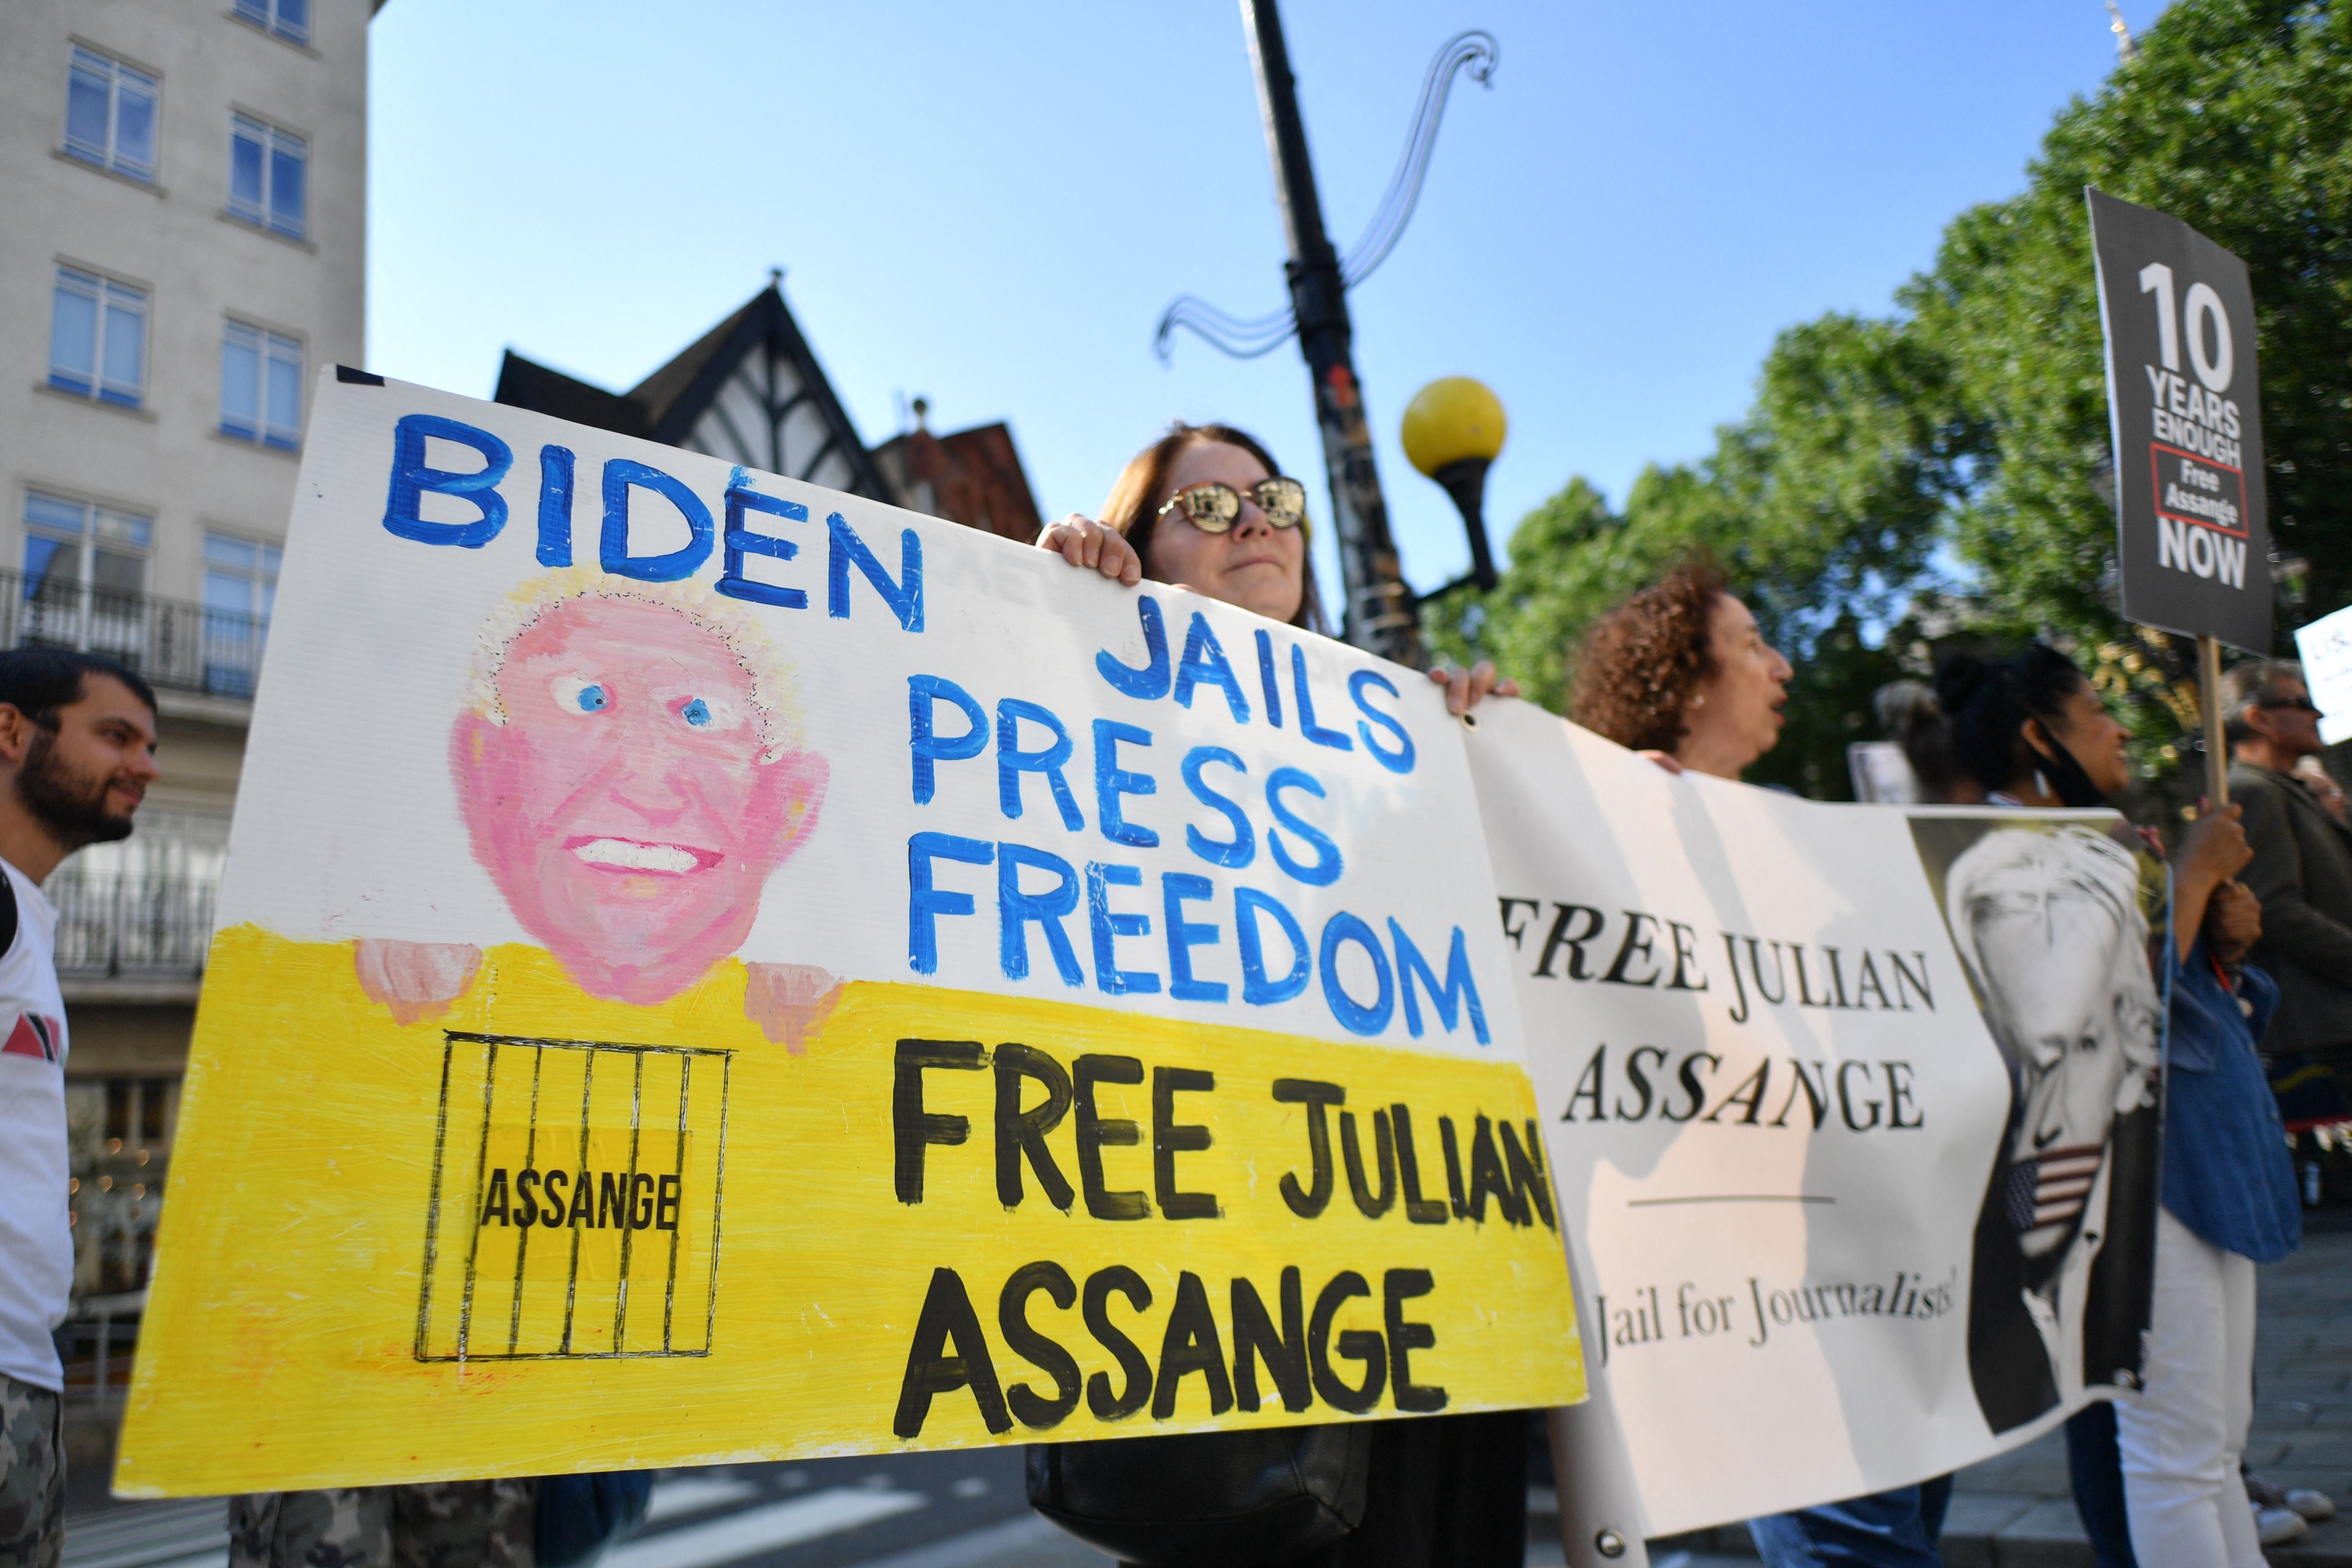 Julian Assange extradition attempt started by Donald Trump but continued by Joe Biden